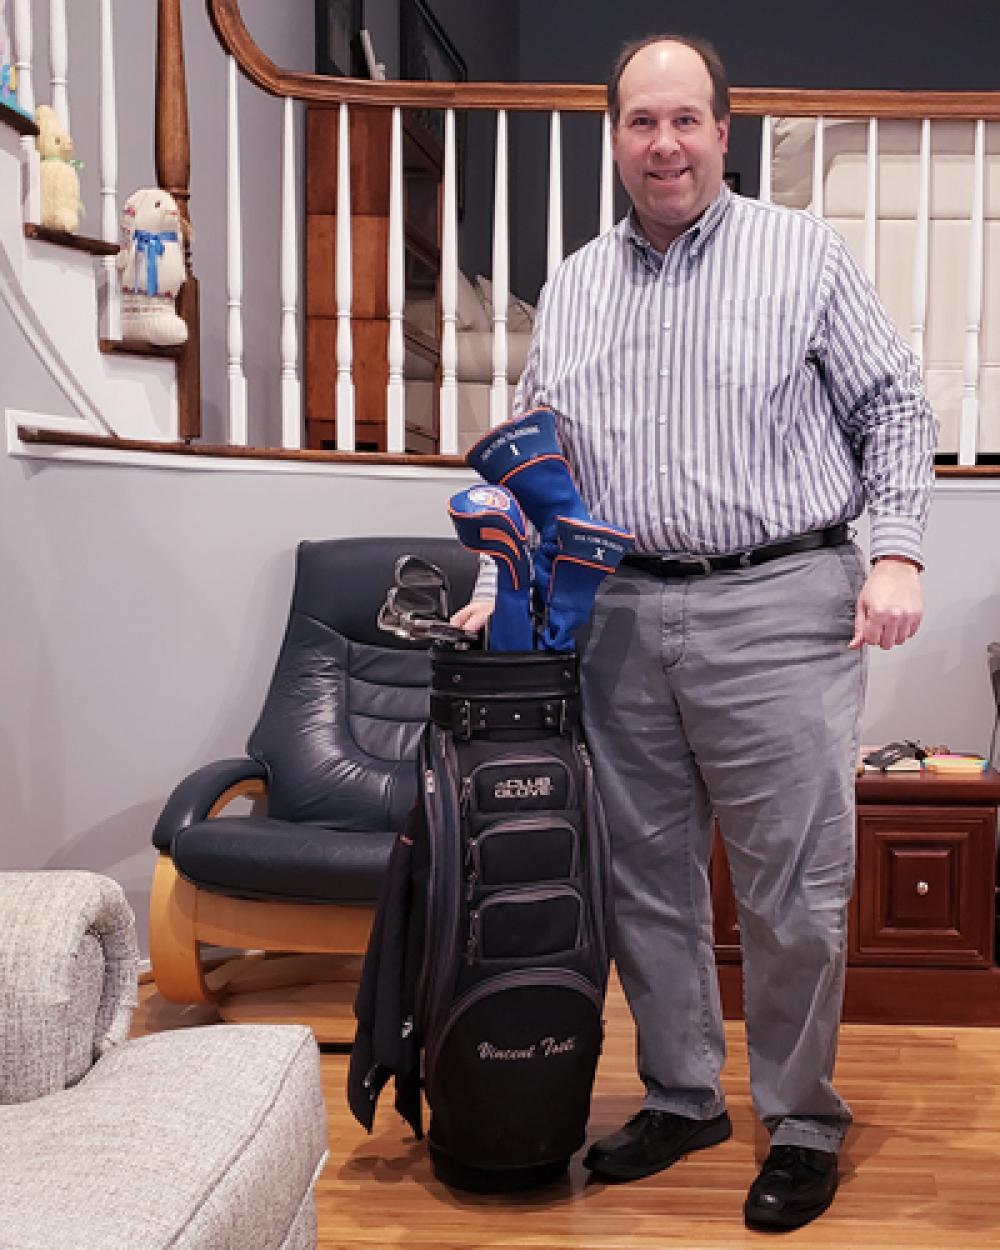 Vincent Tosti at Home Standing Next to His Set of Golf Clubs